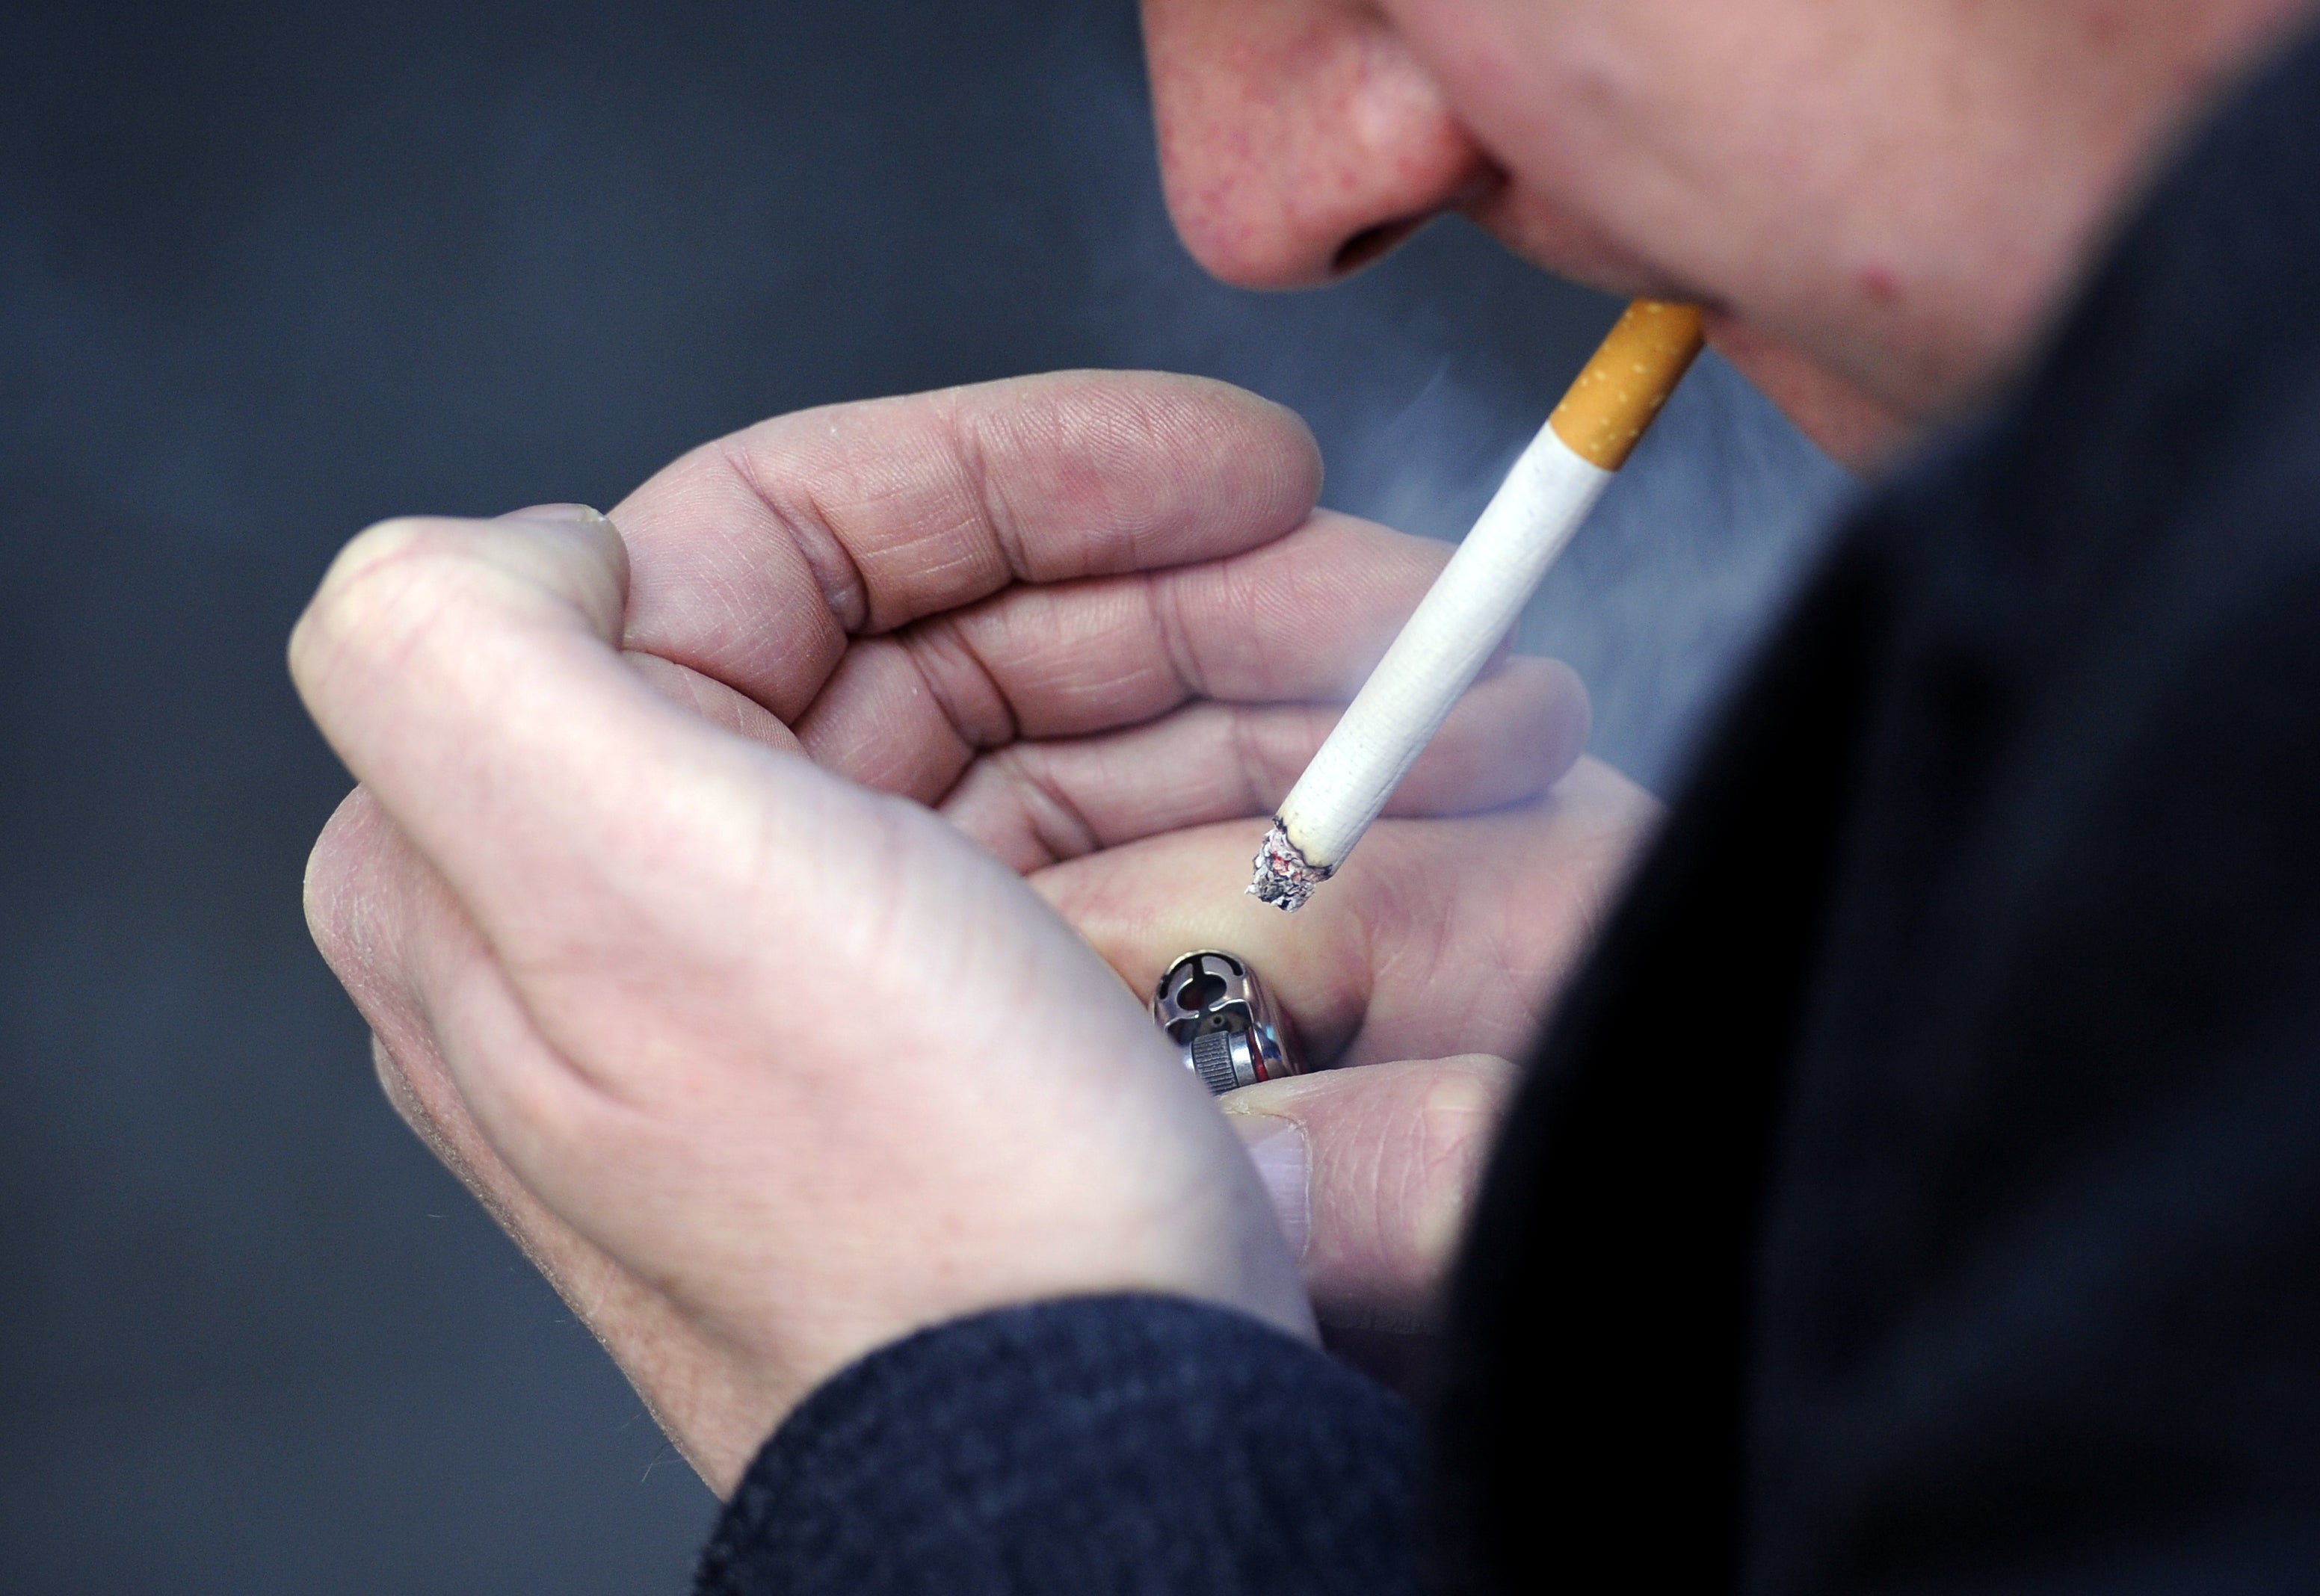 The minimum age for people to legally buy tobacco in England should be raised annually, a review has said (Jonathan Brady/PA)